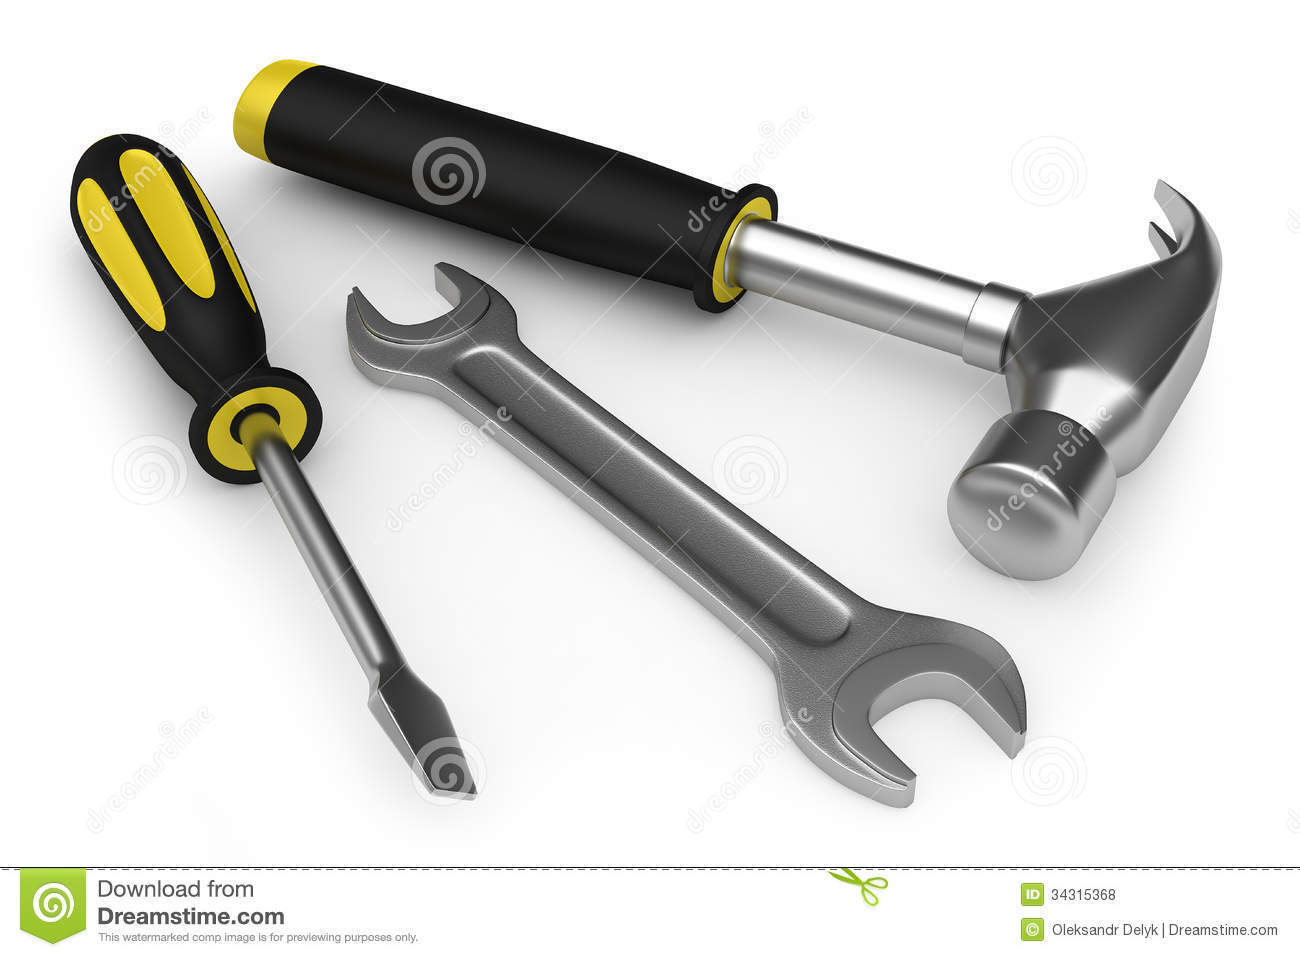 Hammer Wrench And Screwdriver Royalty Free Stock Photos   Image    